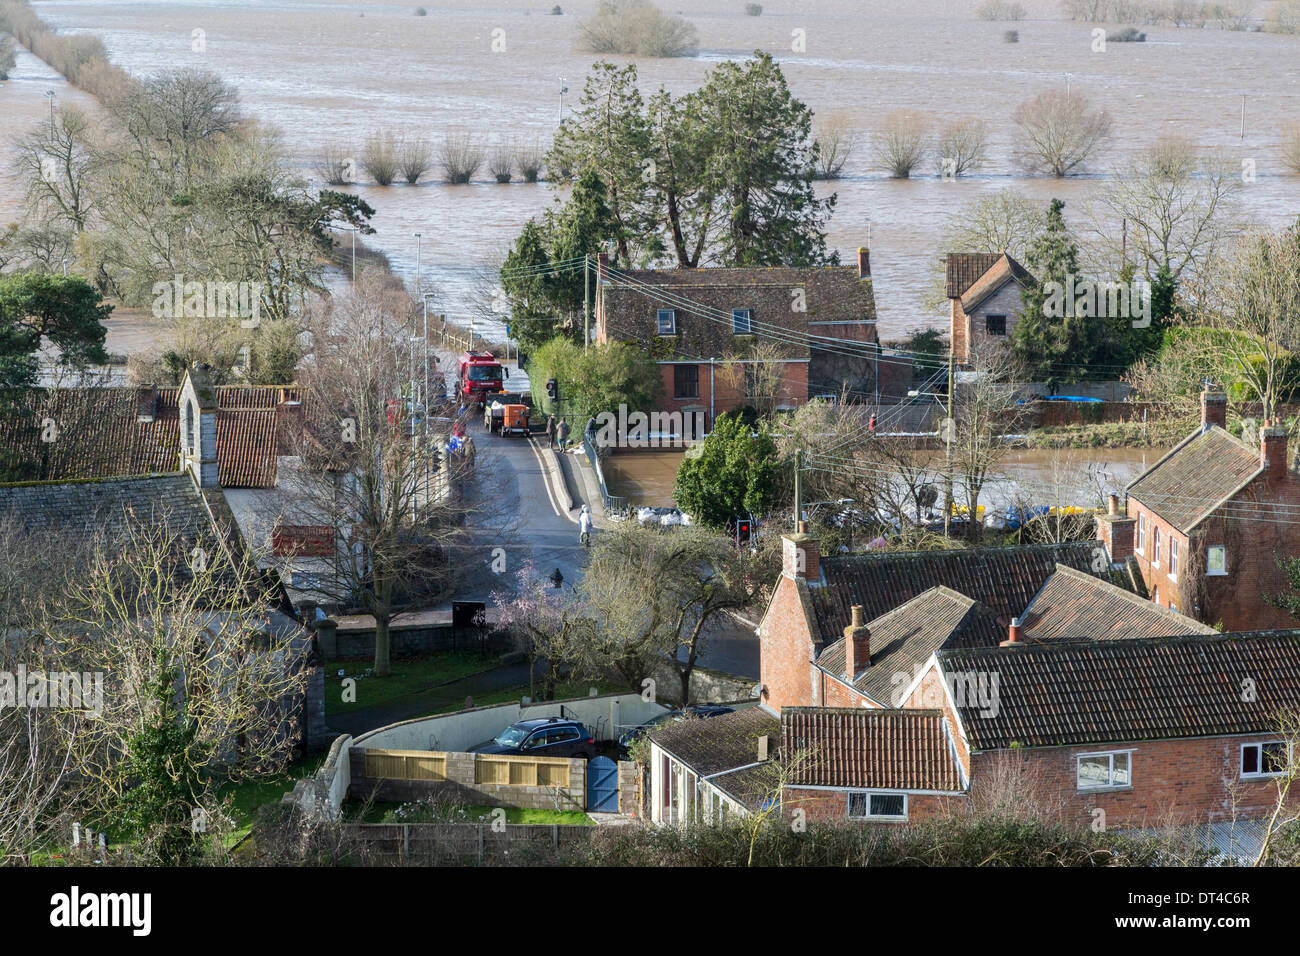 Borrowbridge, Somerset, UK. 8th February 2014. The village of Burrowbridge in Somerset on 8th February 2014 surrounded by floodwater as viewed from the top of Burrow Mump. Due to exceptionally high rainfall, the River Parrett has been unable to cope with the volume of water and has flooded nearby farmland and the main road the A361 to Taunton has been closed for seven weeks. A severe flood alert which means life may be at risk remains in place and many occupants have been told to evacuate. Credit:  Nick Cable/Alamy Live News Stock Photo